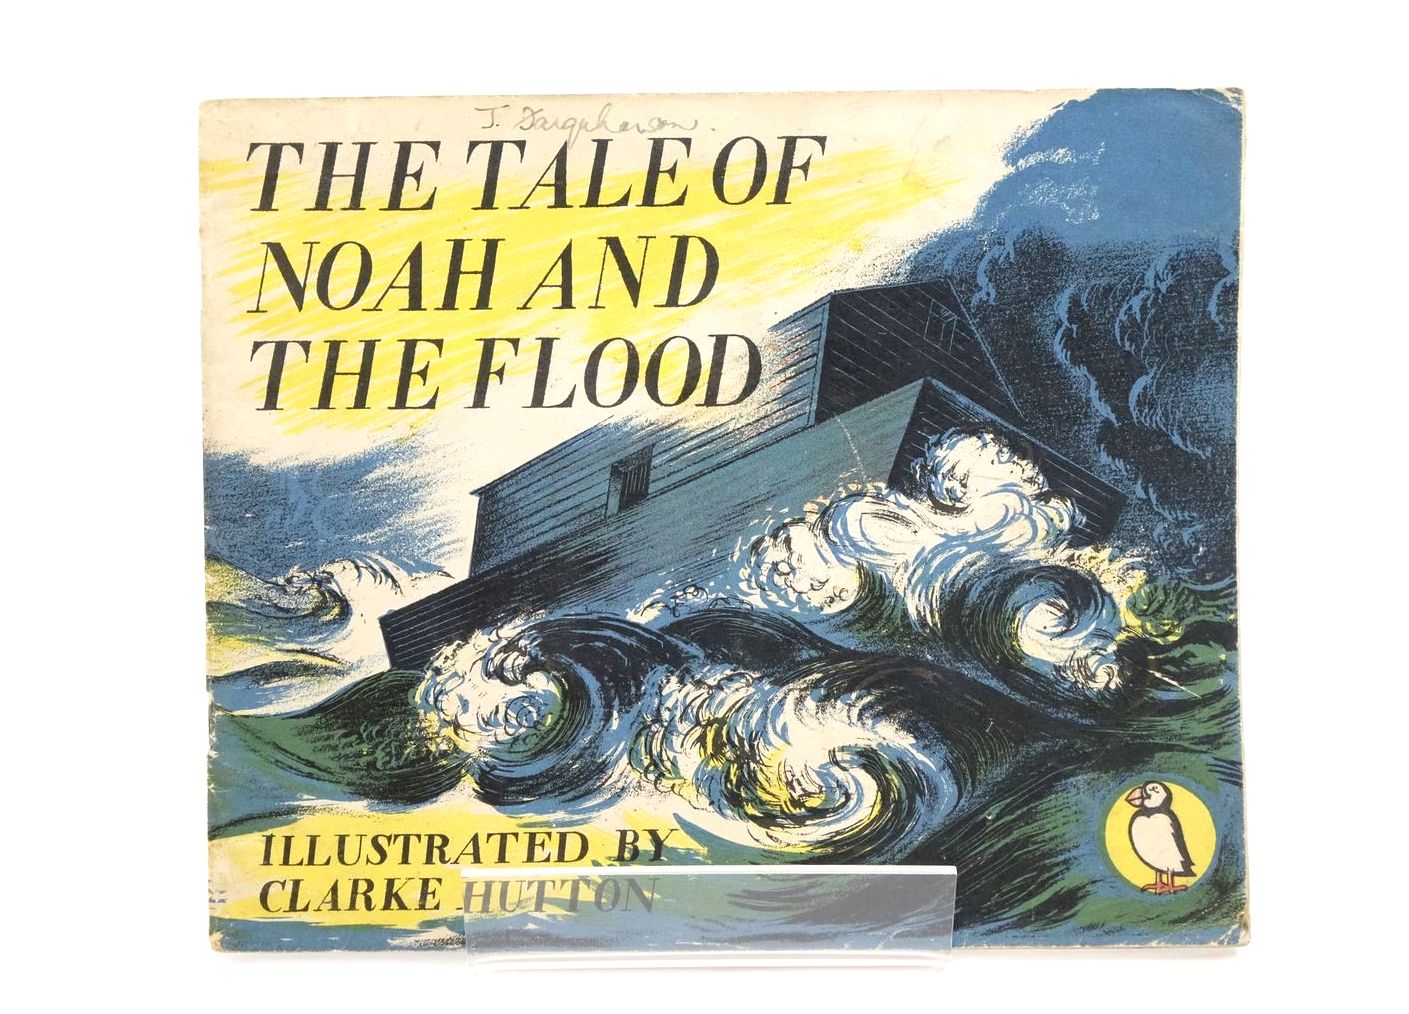 Photo of THE TALE OF NOAH AND THE FLOOD written by Williams, W.E. illustrated by Hutton, Clarke published by Penguin Books Ltd (STOCK CODE: 1323221)  for sale by Stella & Rose's Books